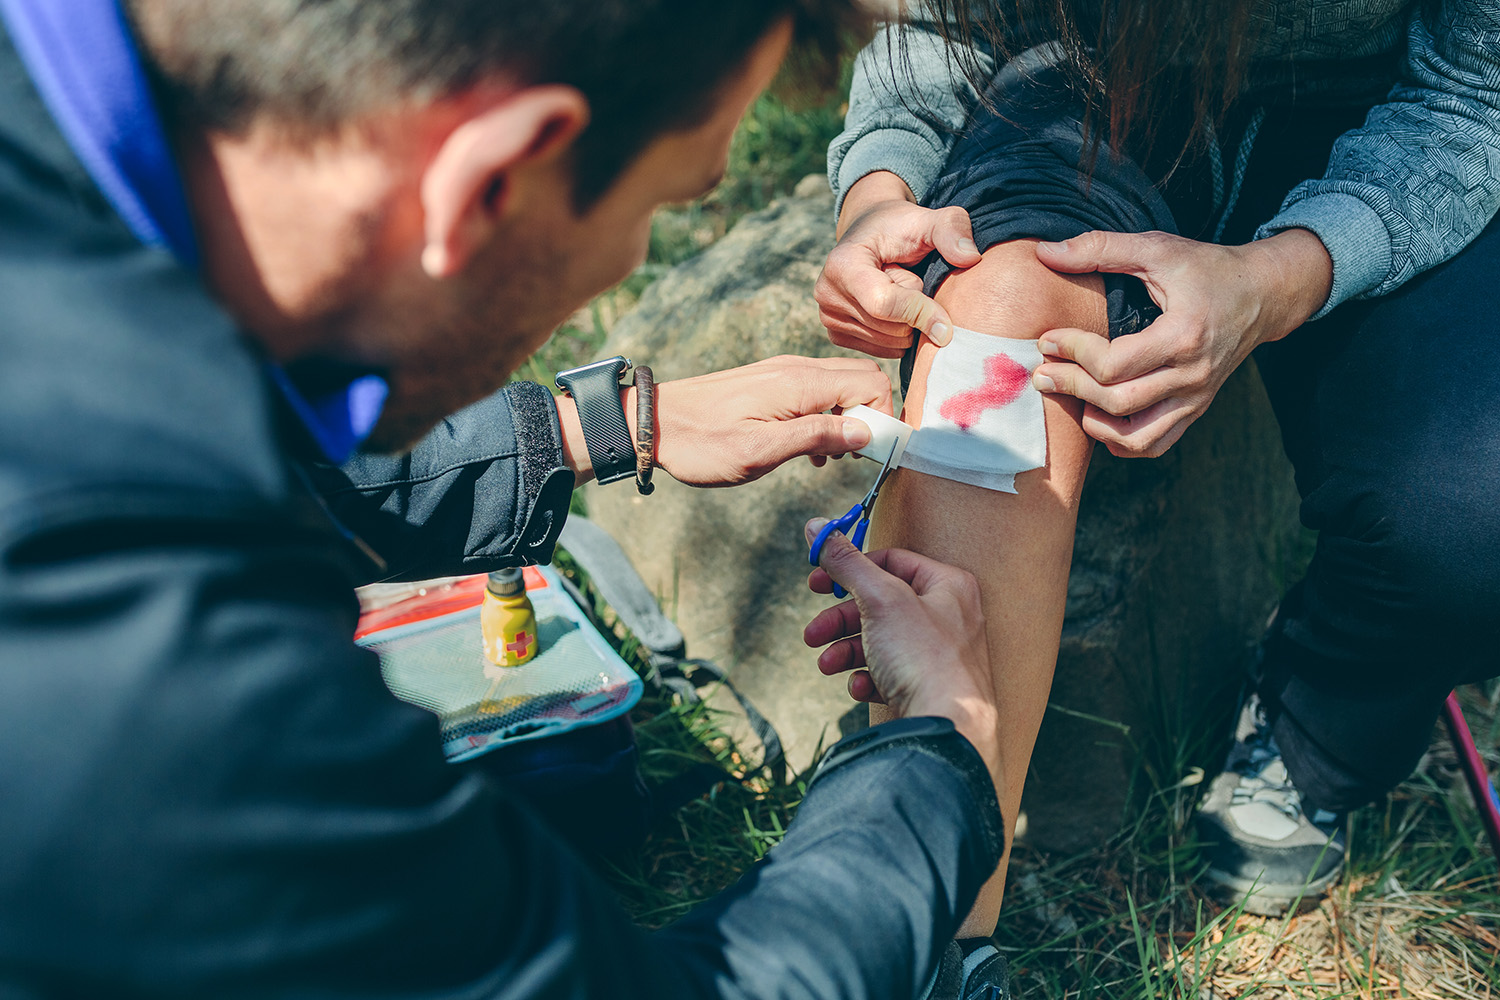 https://www.themanual.com/wp-content/uploads/sites/9/2019/04/wilderness-first-aid-bleeding.jpg?fit=800%2C533&p=1